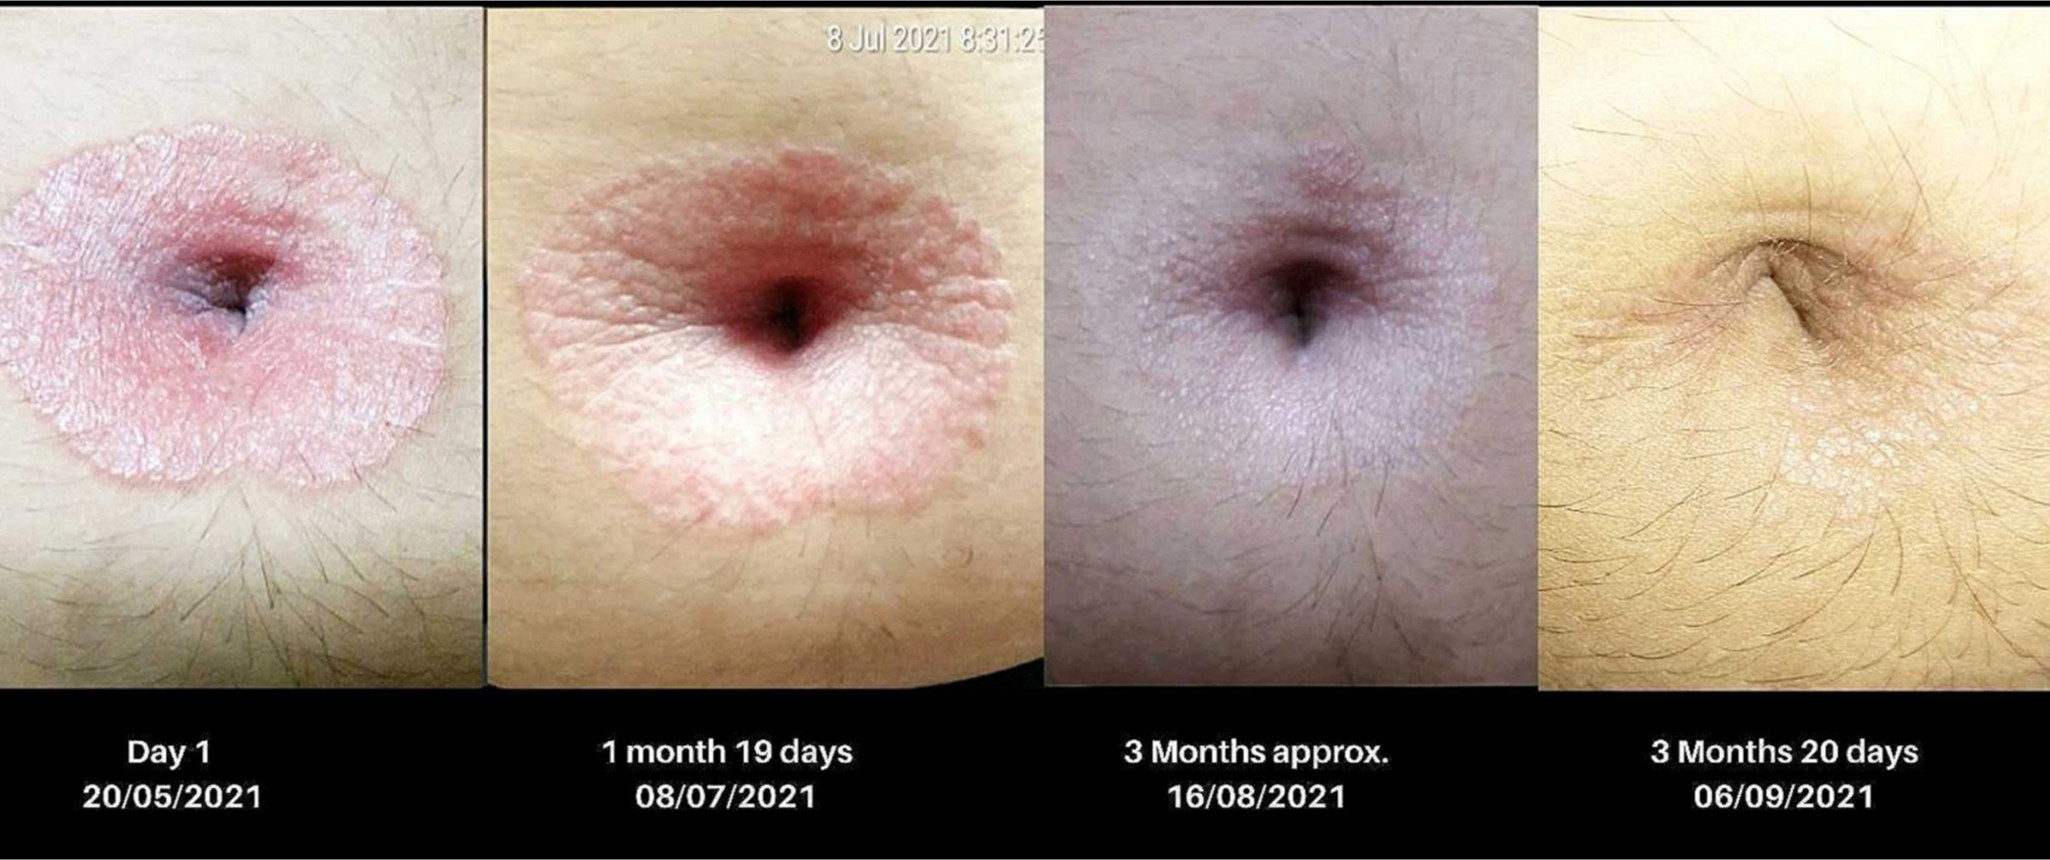 Fig. 10. Peri-umbilical psoriasis in a 17-year-old female, present 2 years. Unresponsive to topical steroids and numerous other treatments. Healed by wheatgrass extract in 4 months with once weekly application.